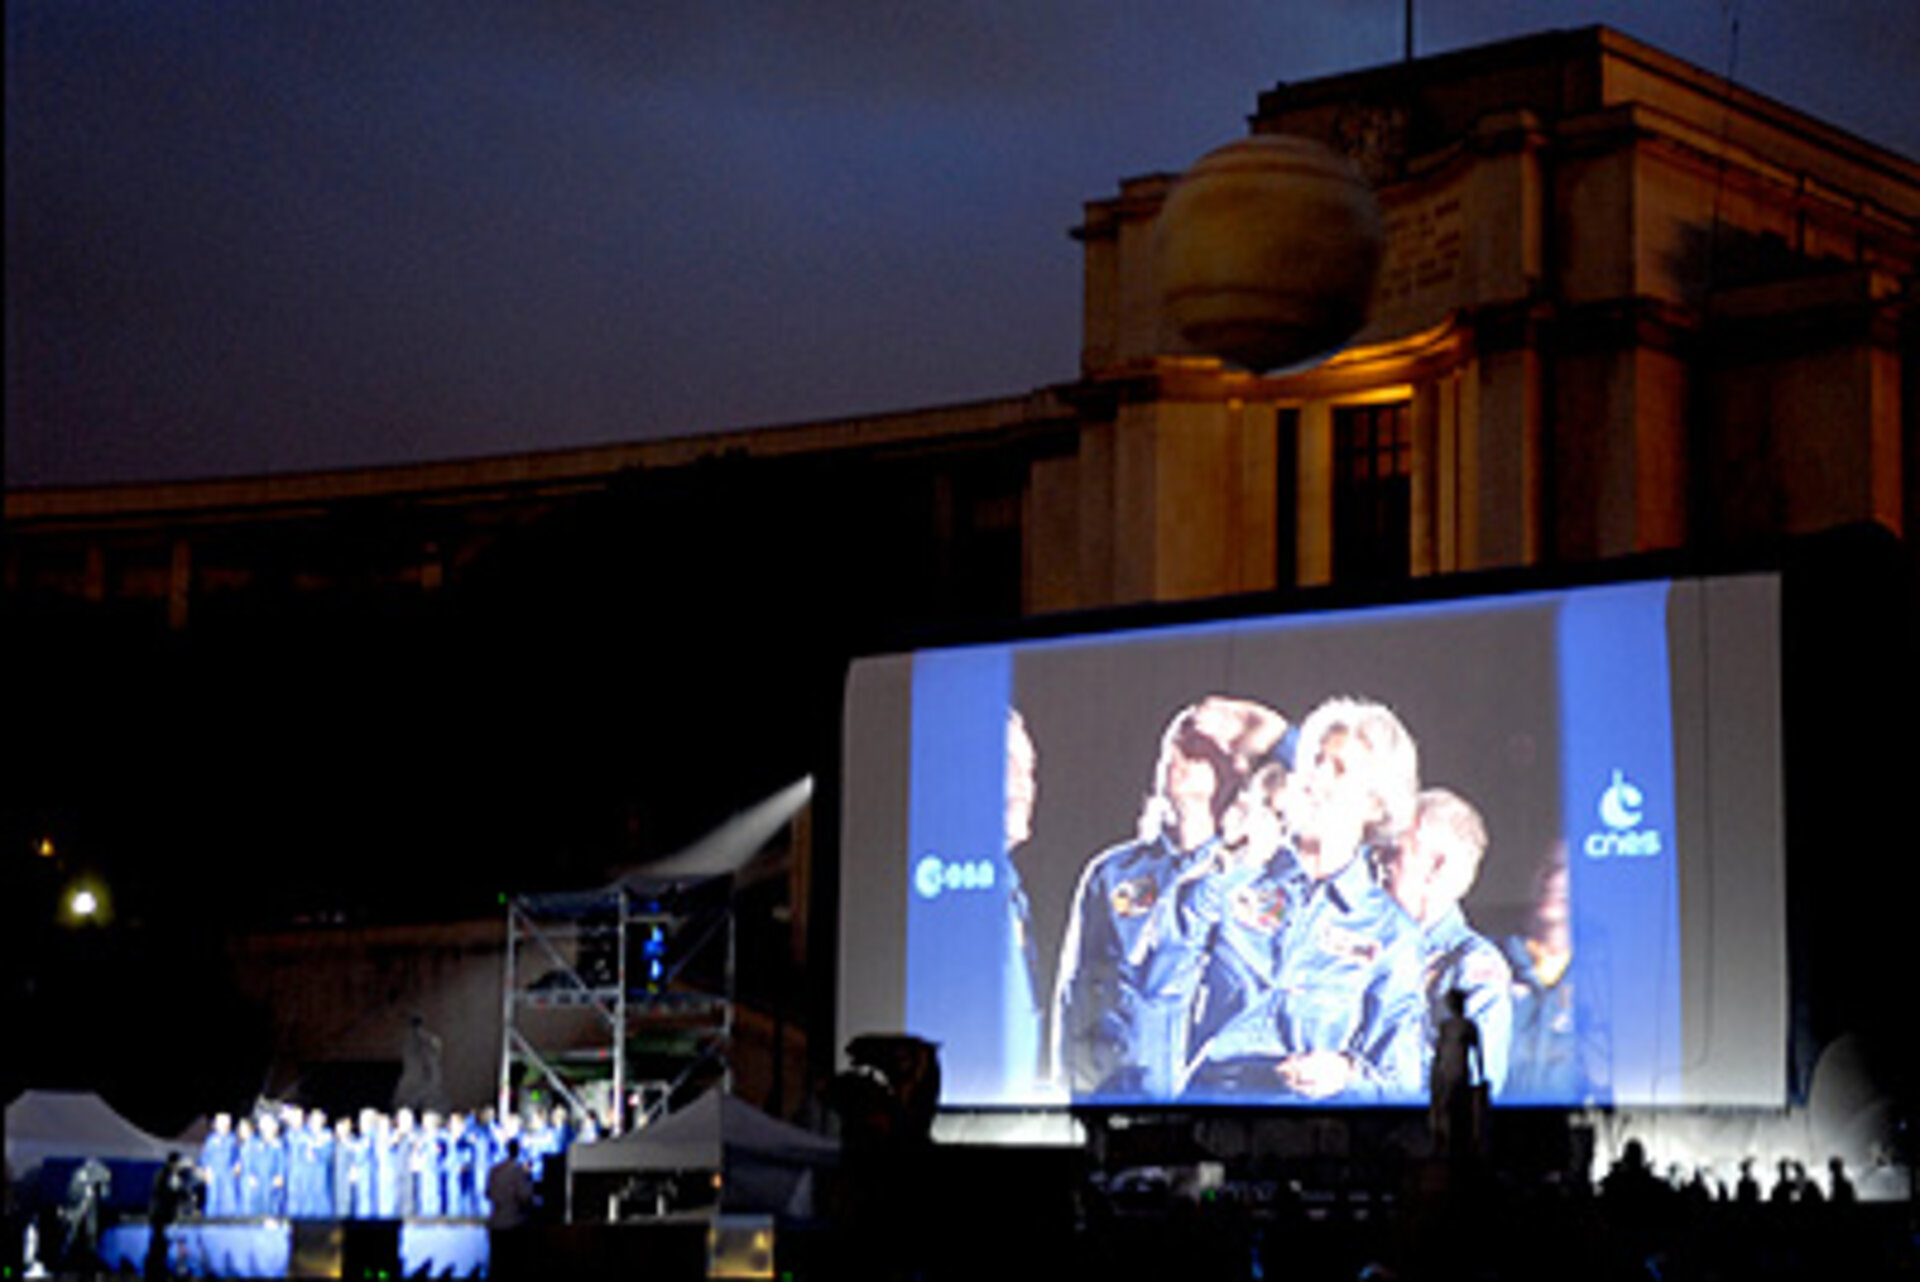 Live link with the International Space Station at the Trocadero